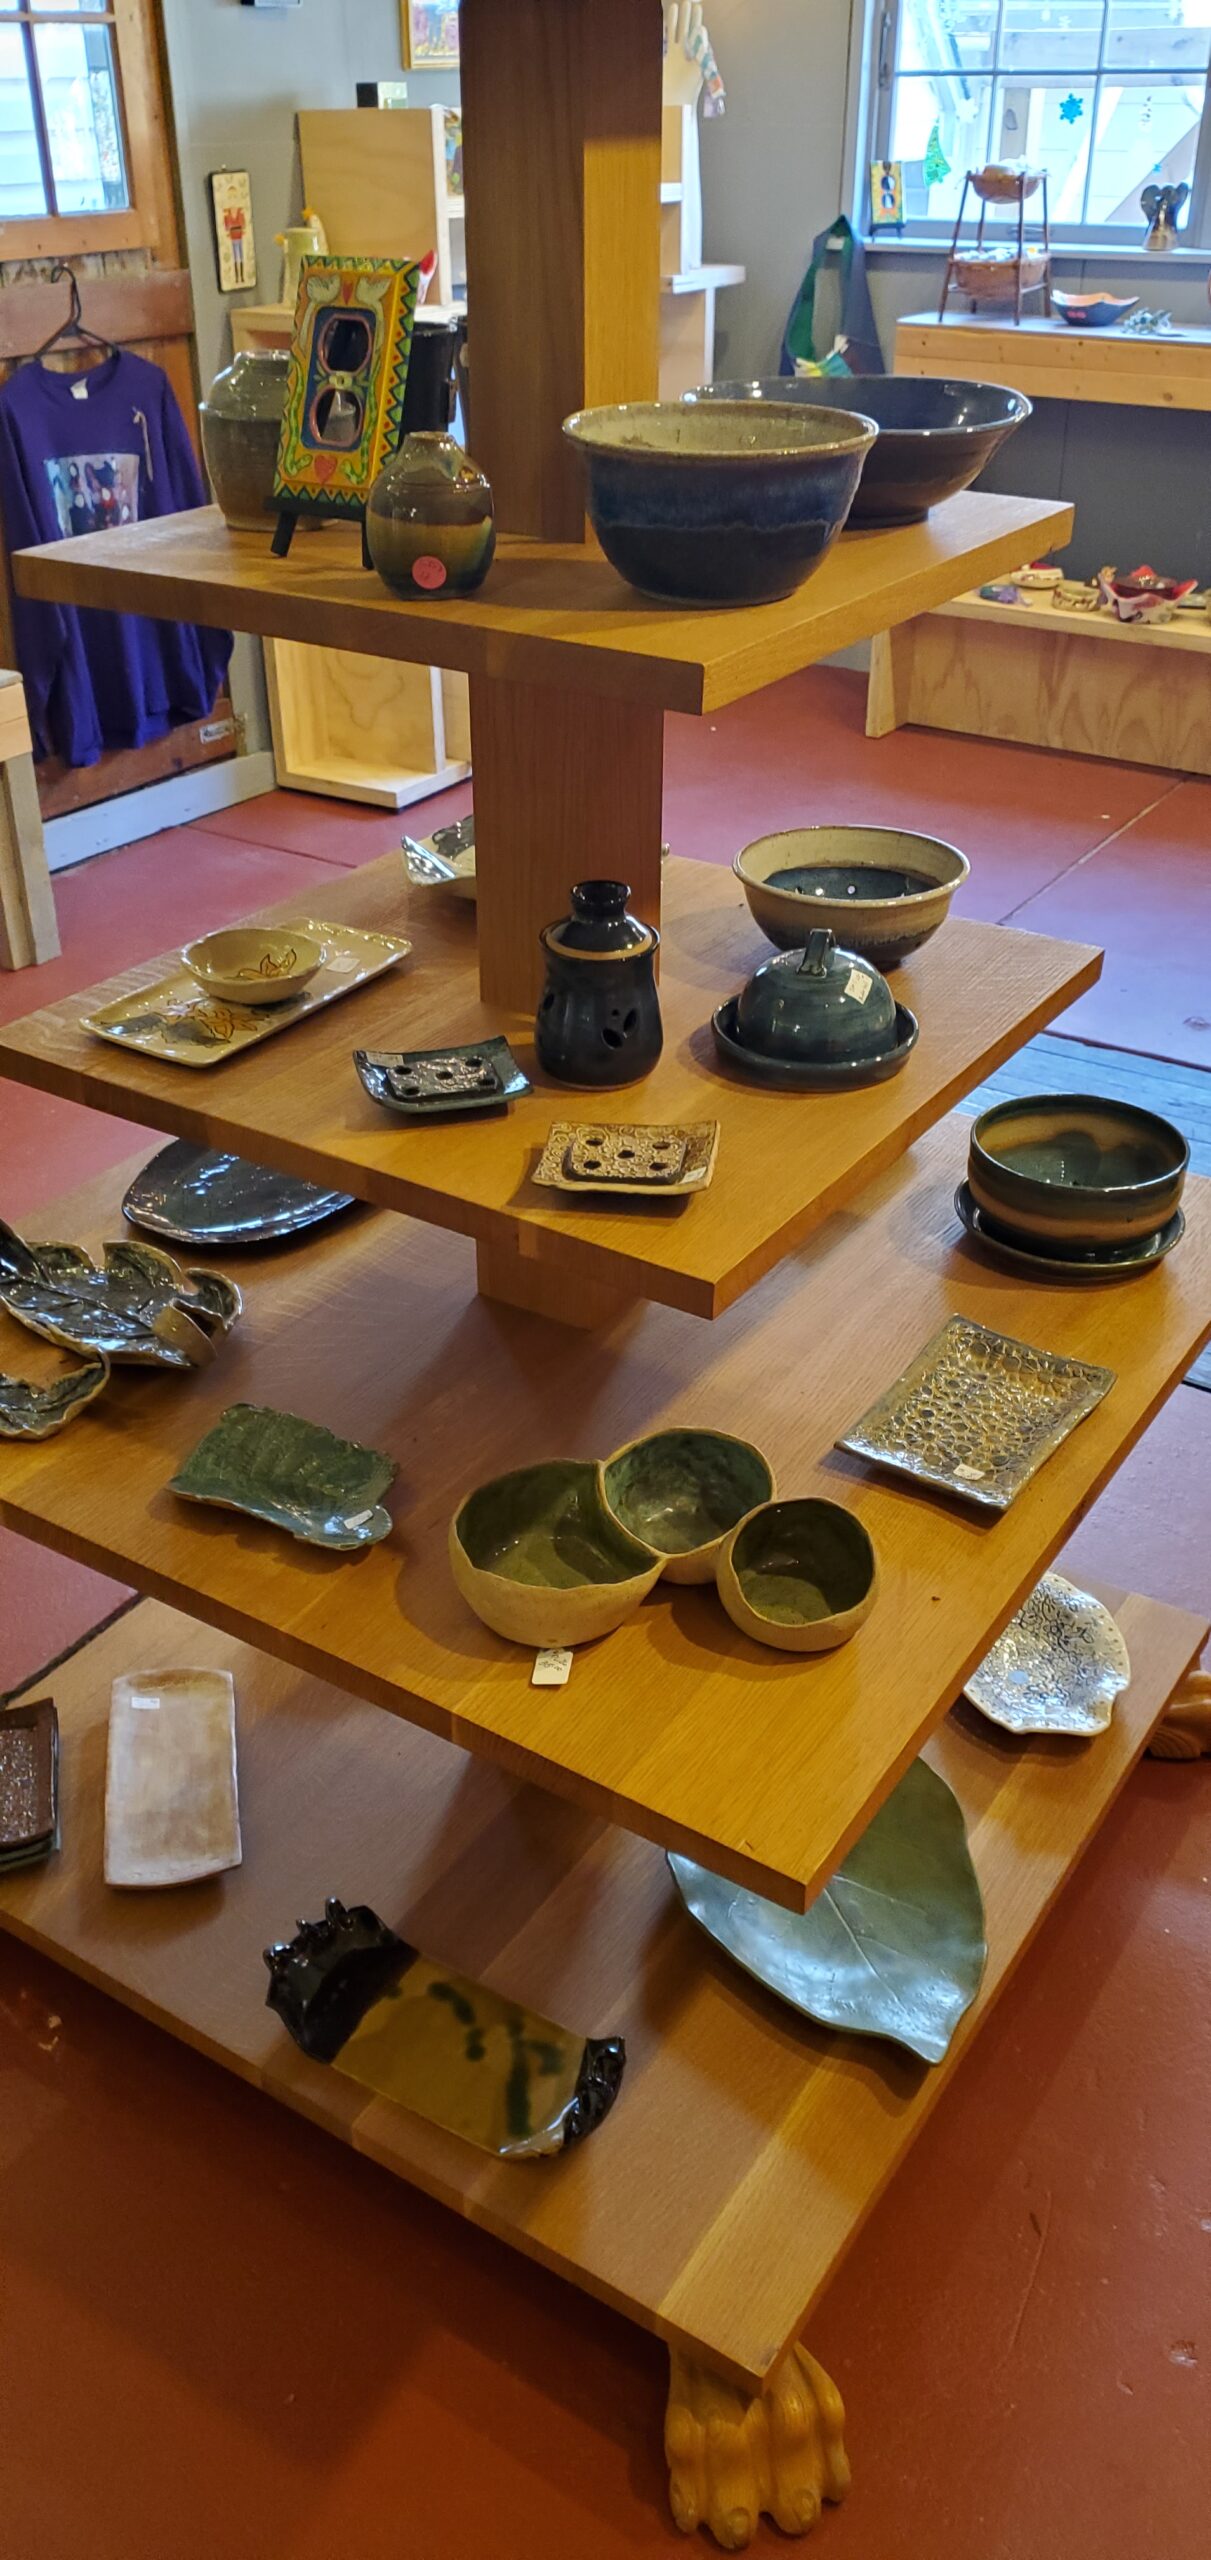 Items on display in the gallery